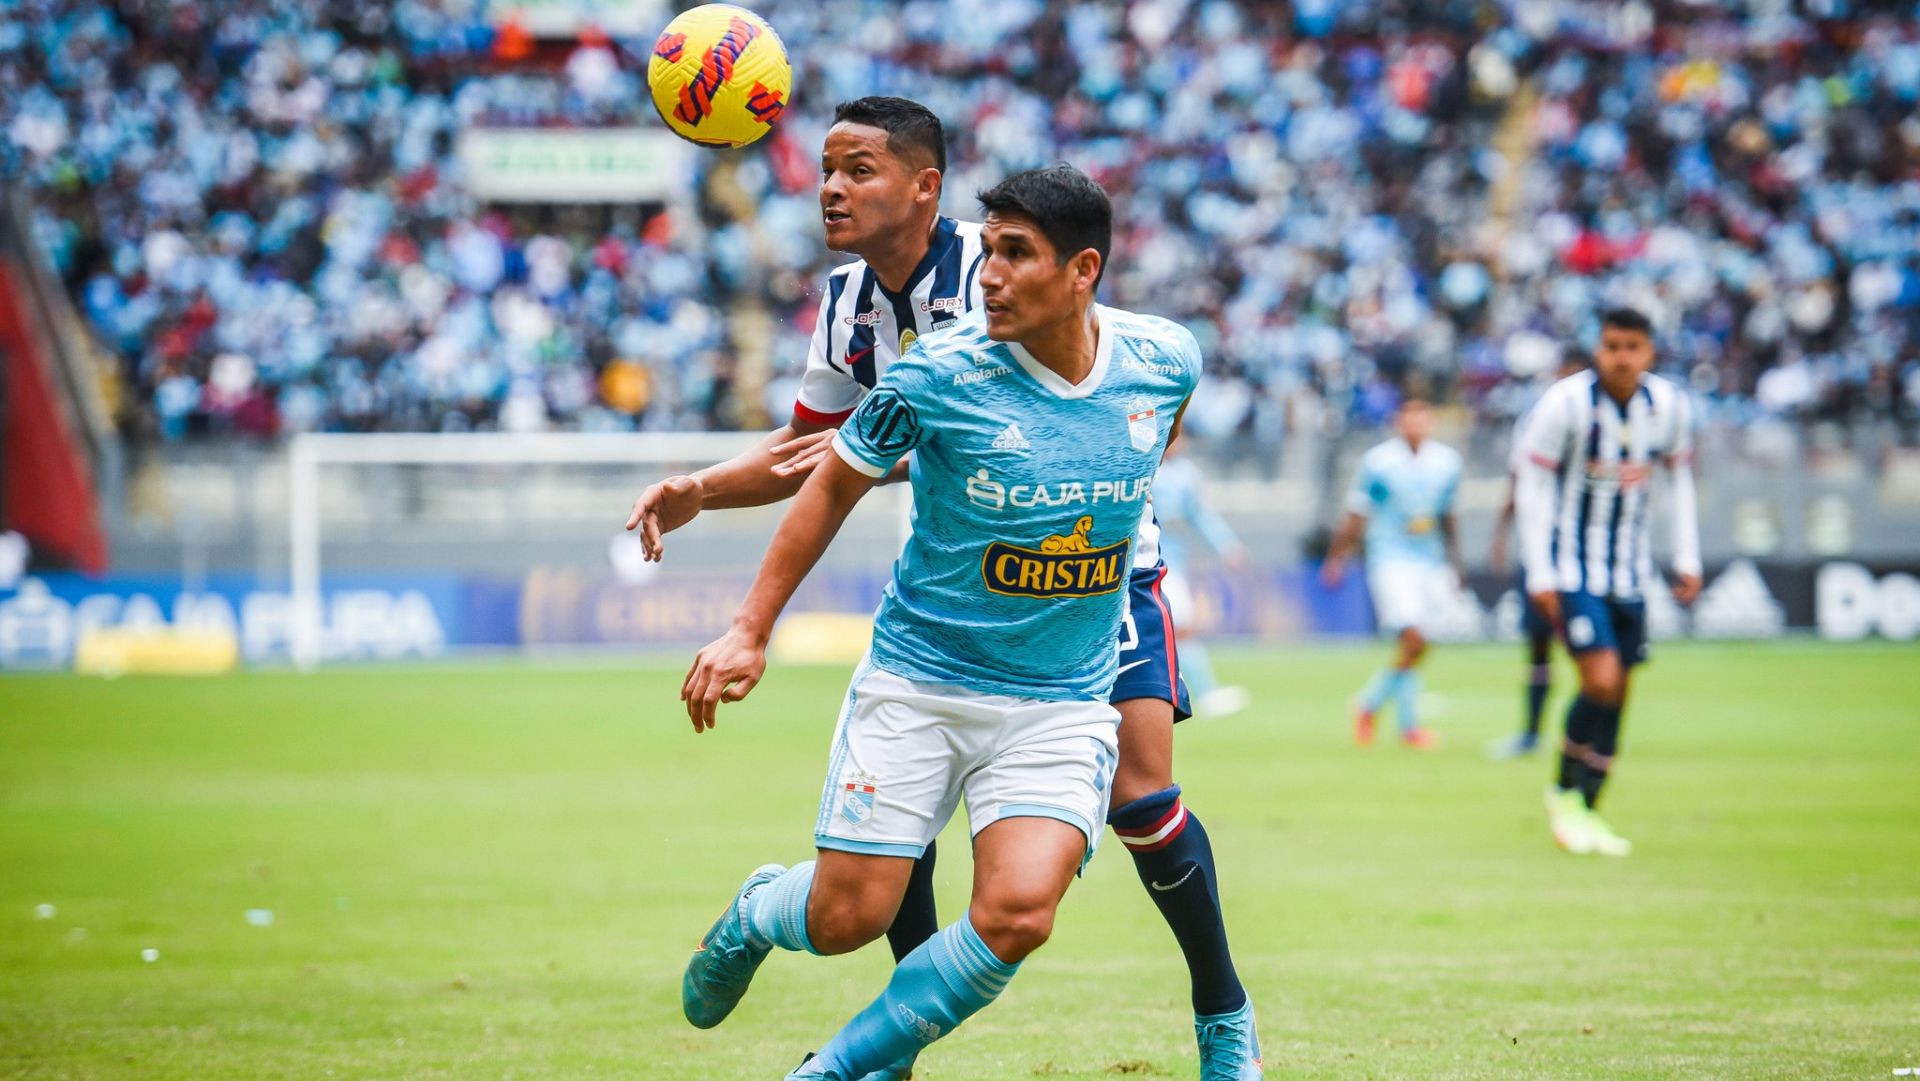 In its last presentation Sporting Cristal tied 0-0 against Alianza Lima for date 5 of the Closing Tournament